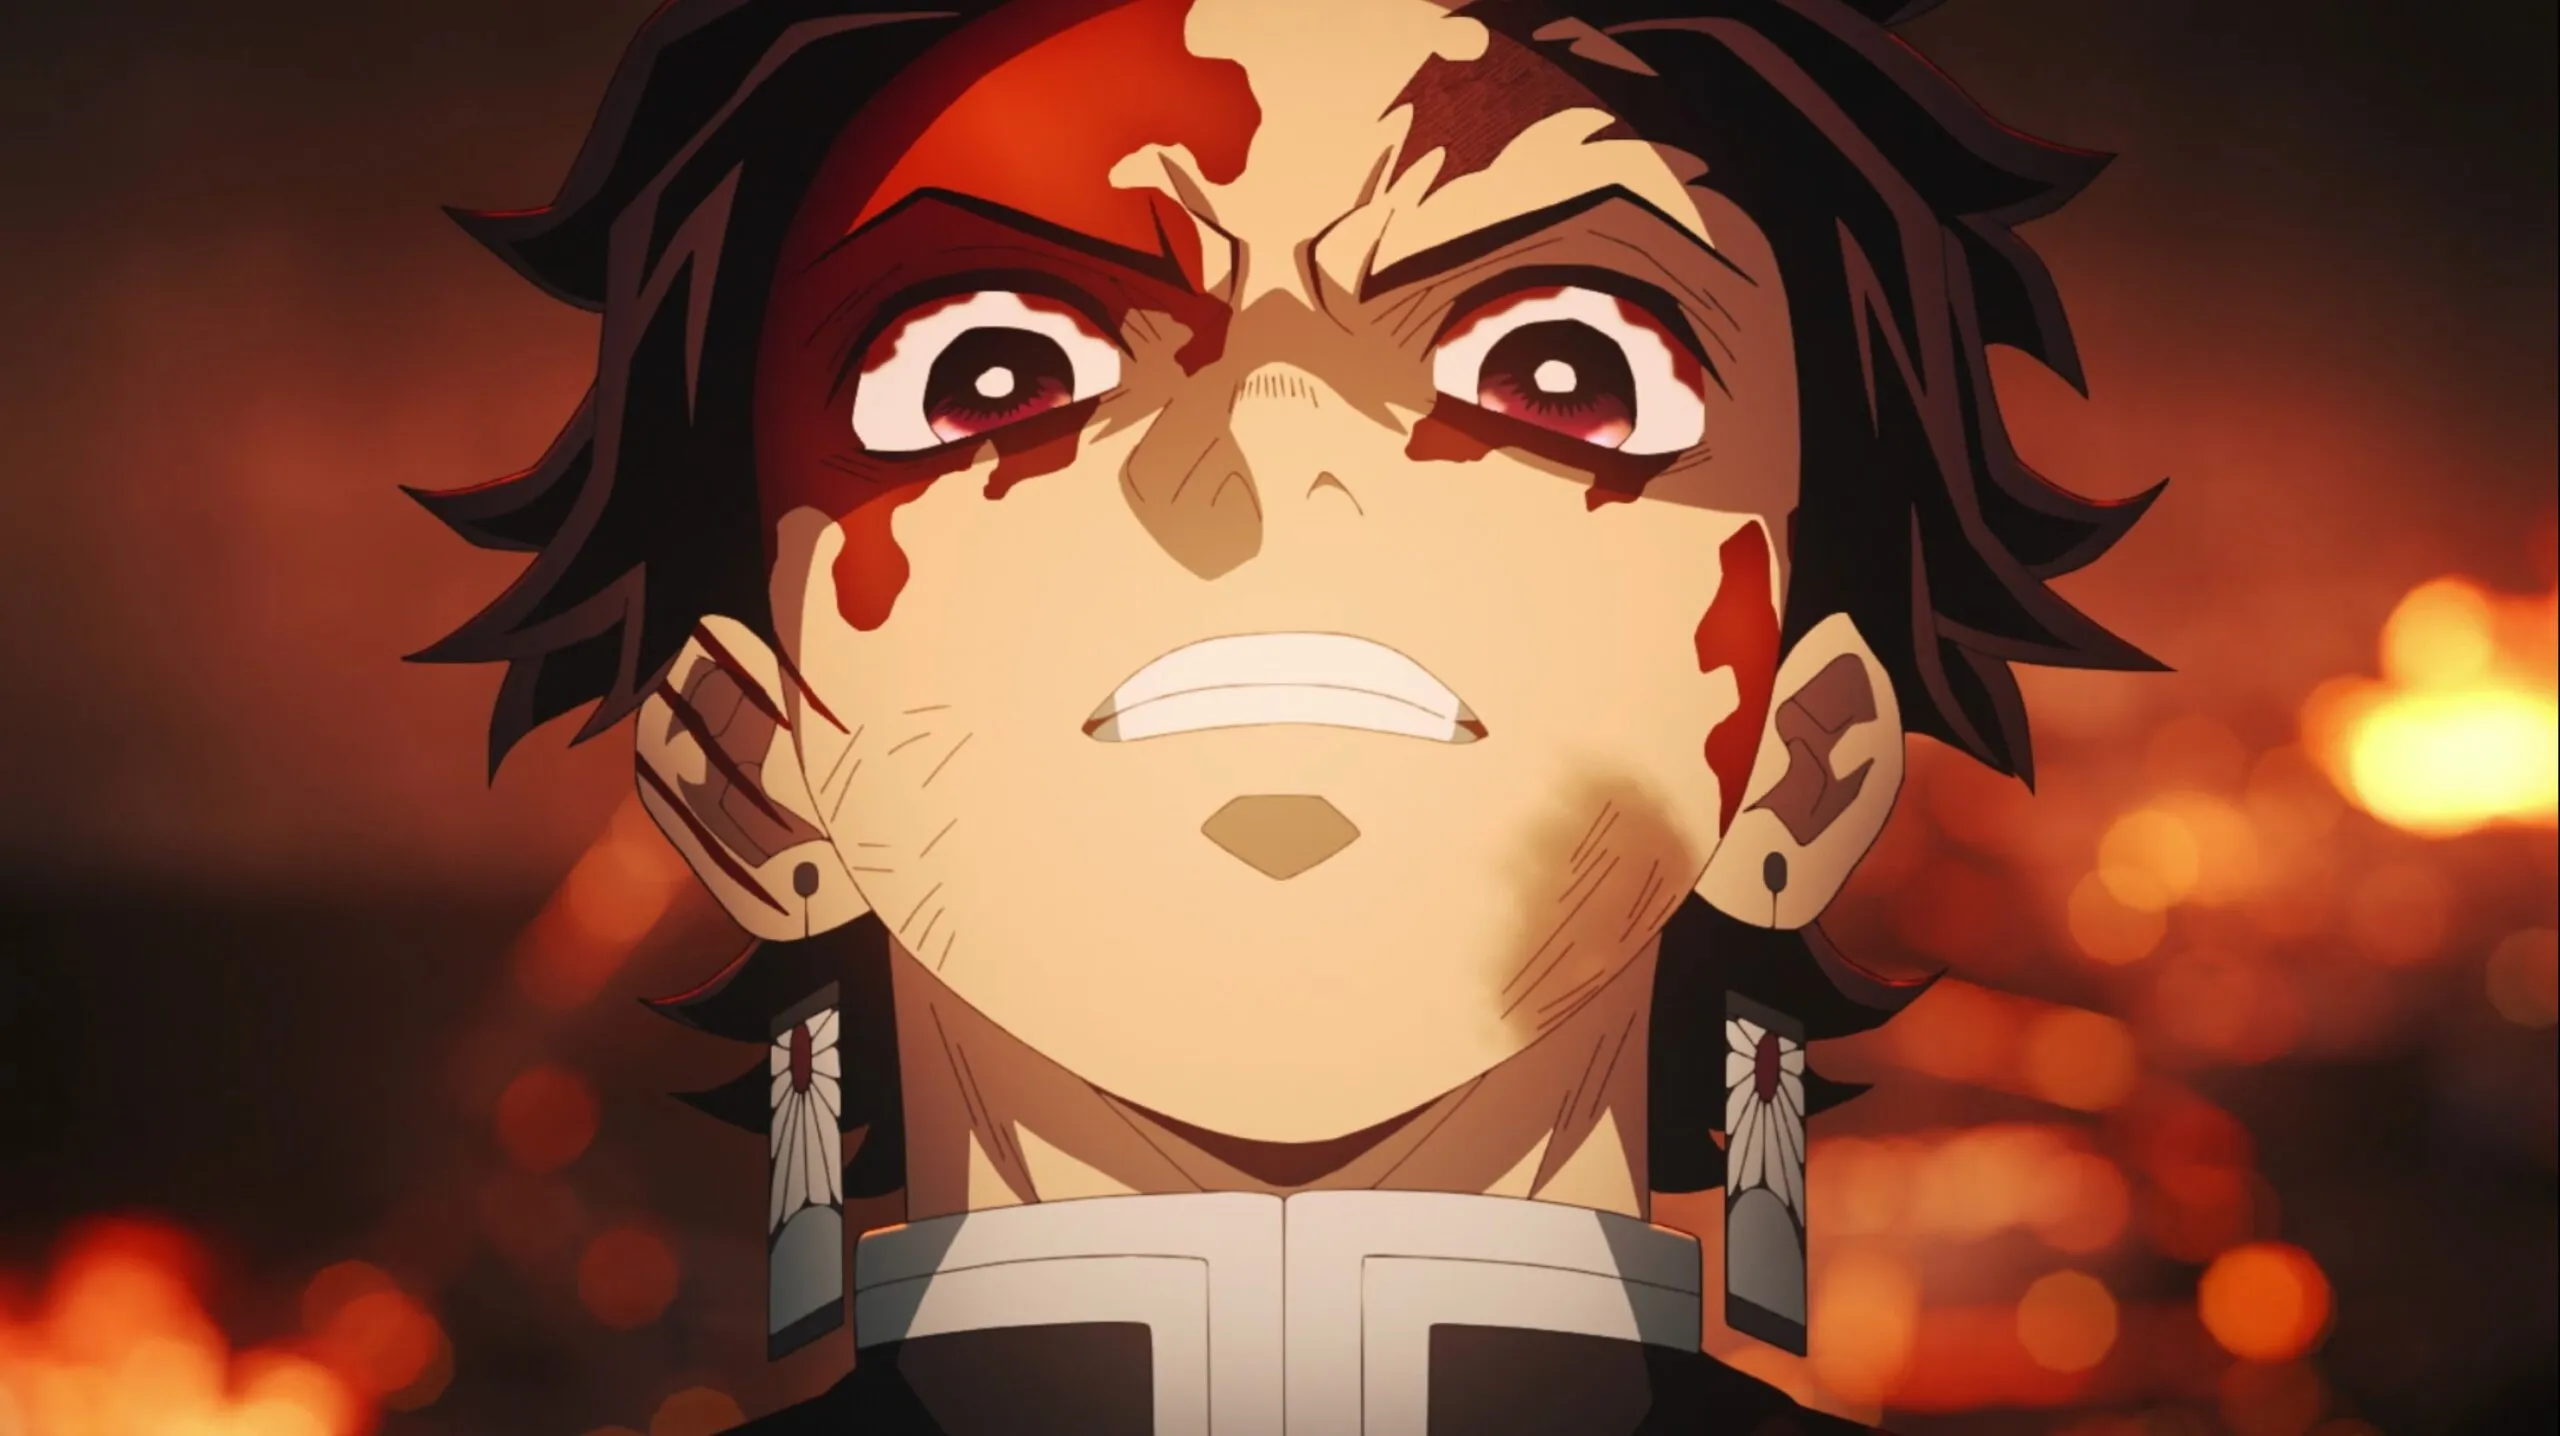 Demon Slayer Season 2 Full list of episodes and watch order